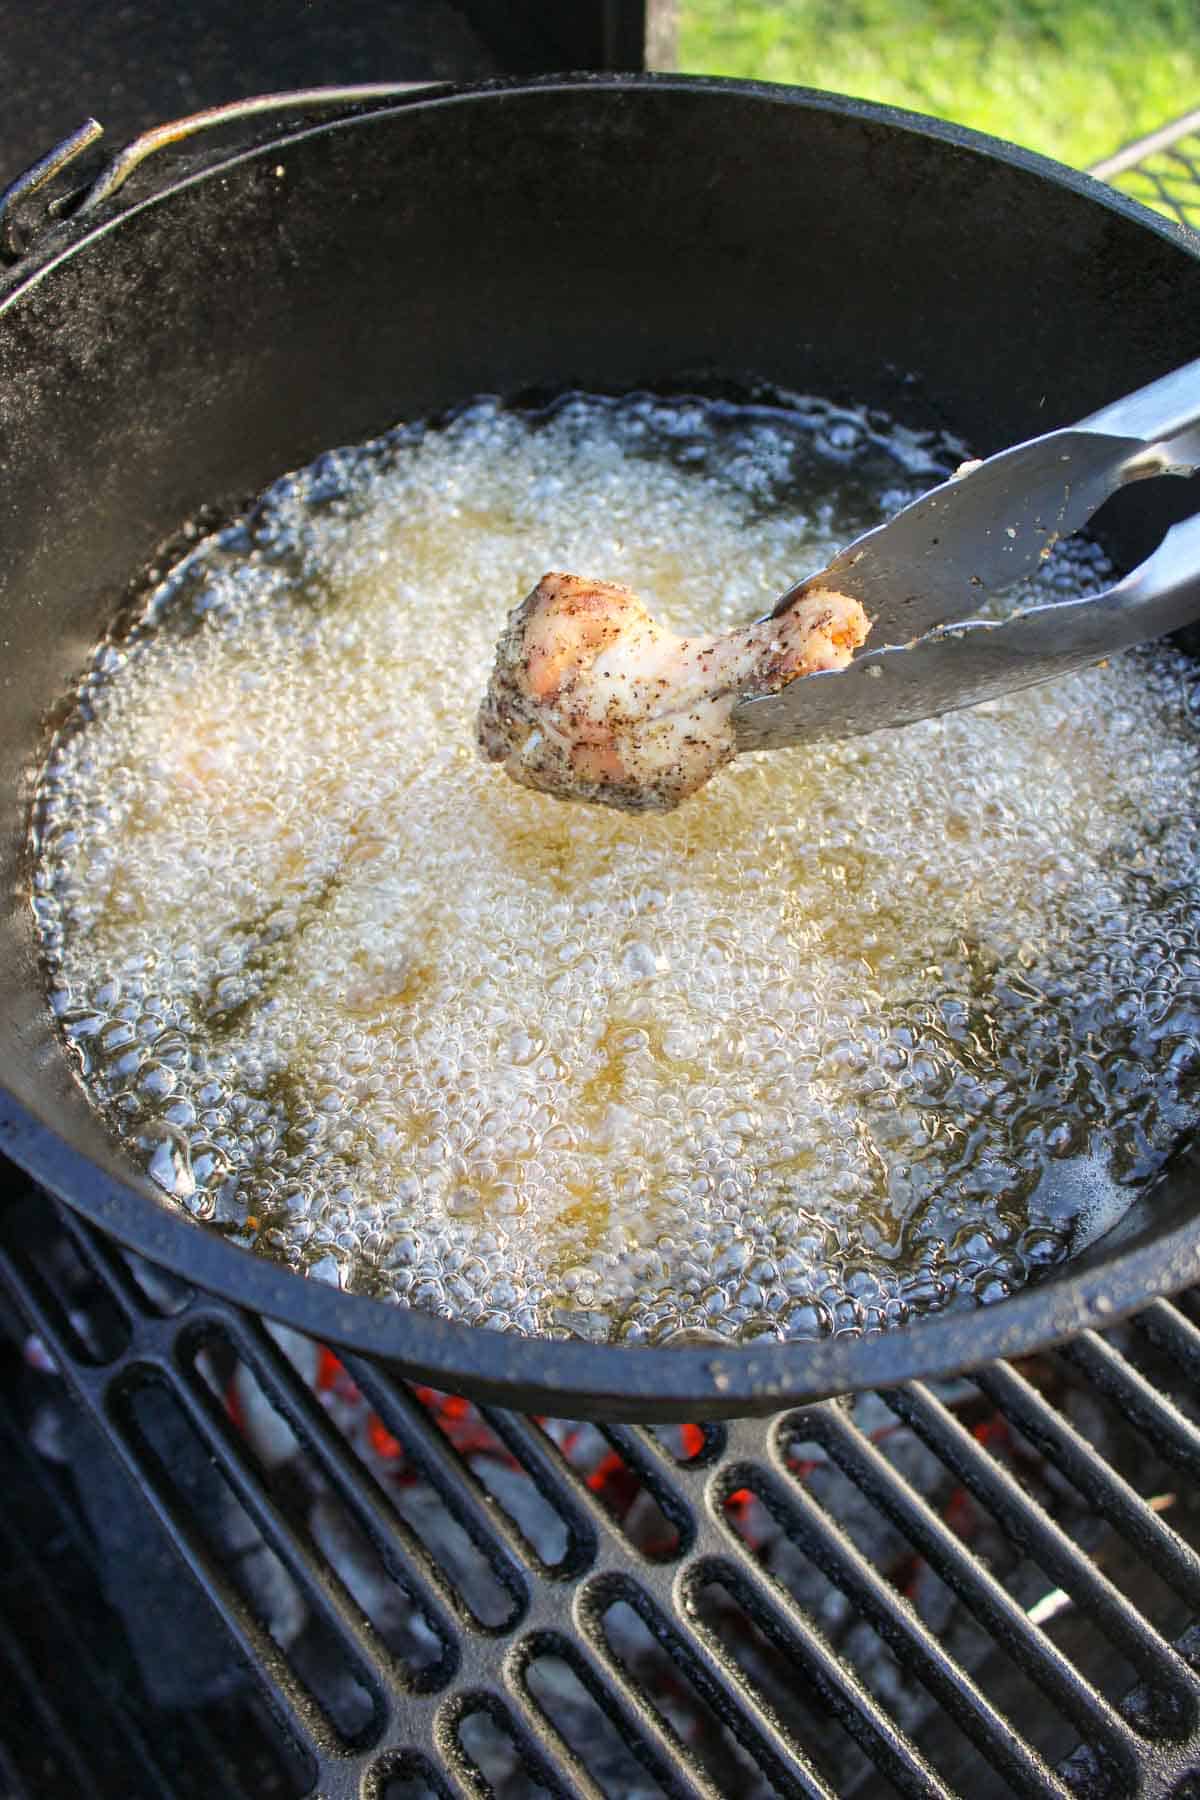 a chicken wing being placed into a pot of bubbling oil